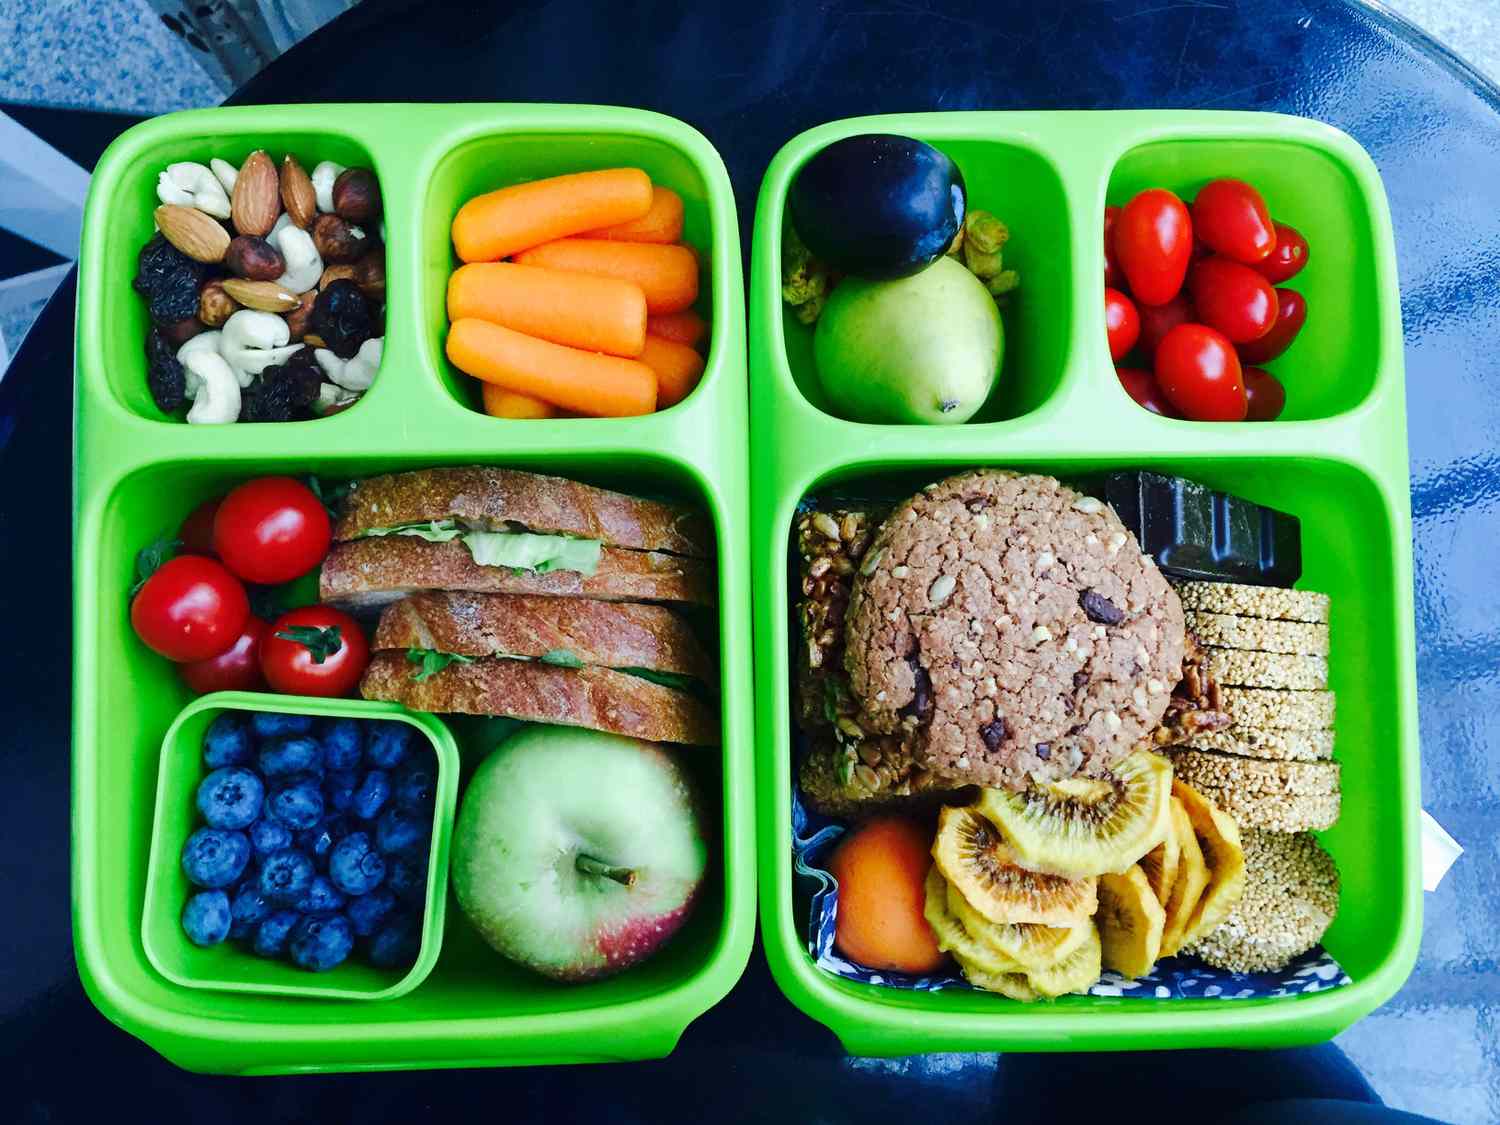 Plan in advance, get children involved with preparing nutritious school lunches and weeknight meals